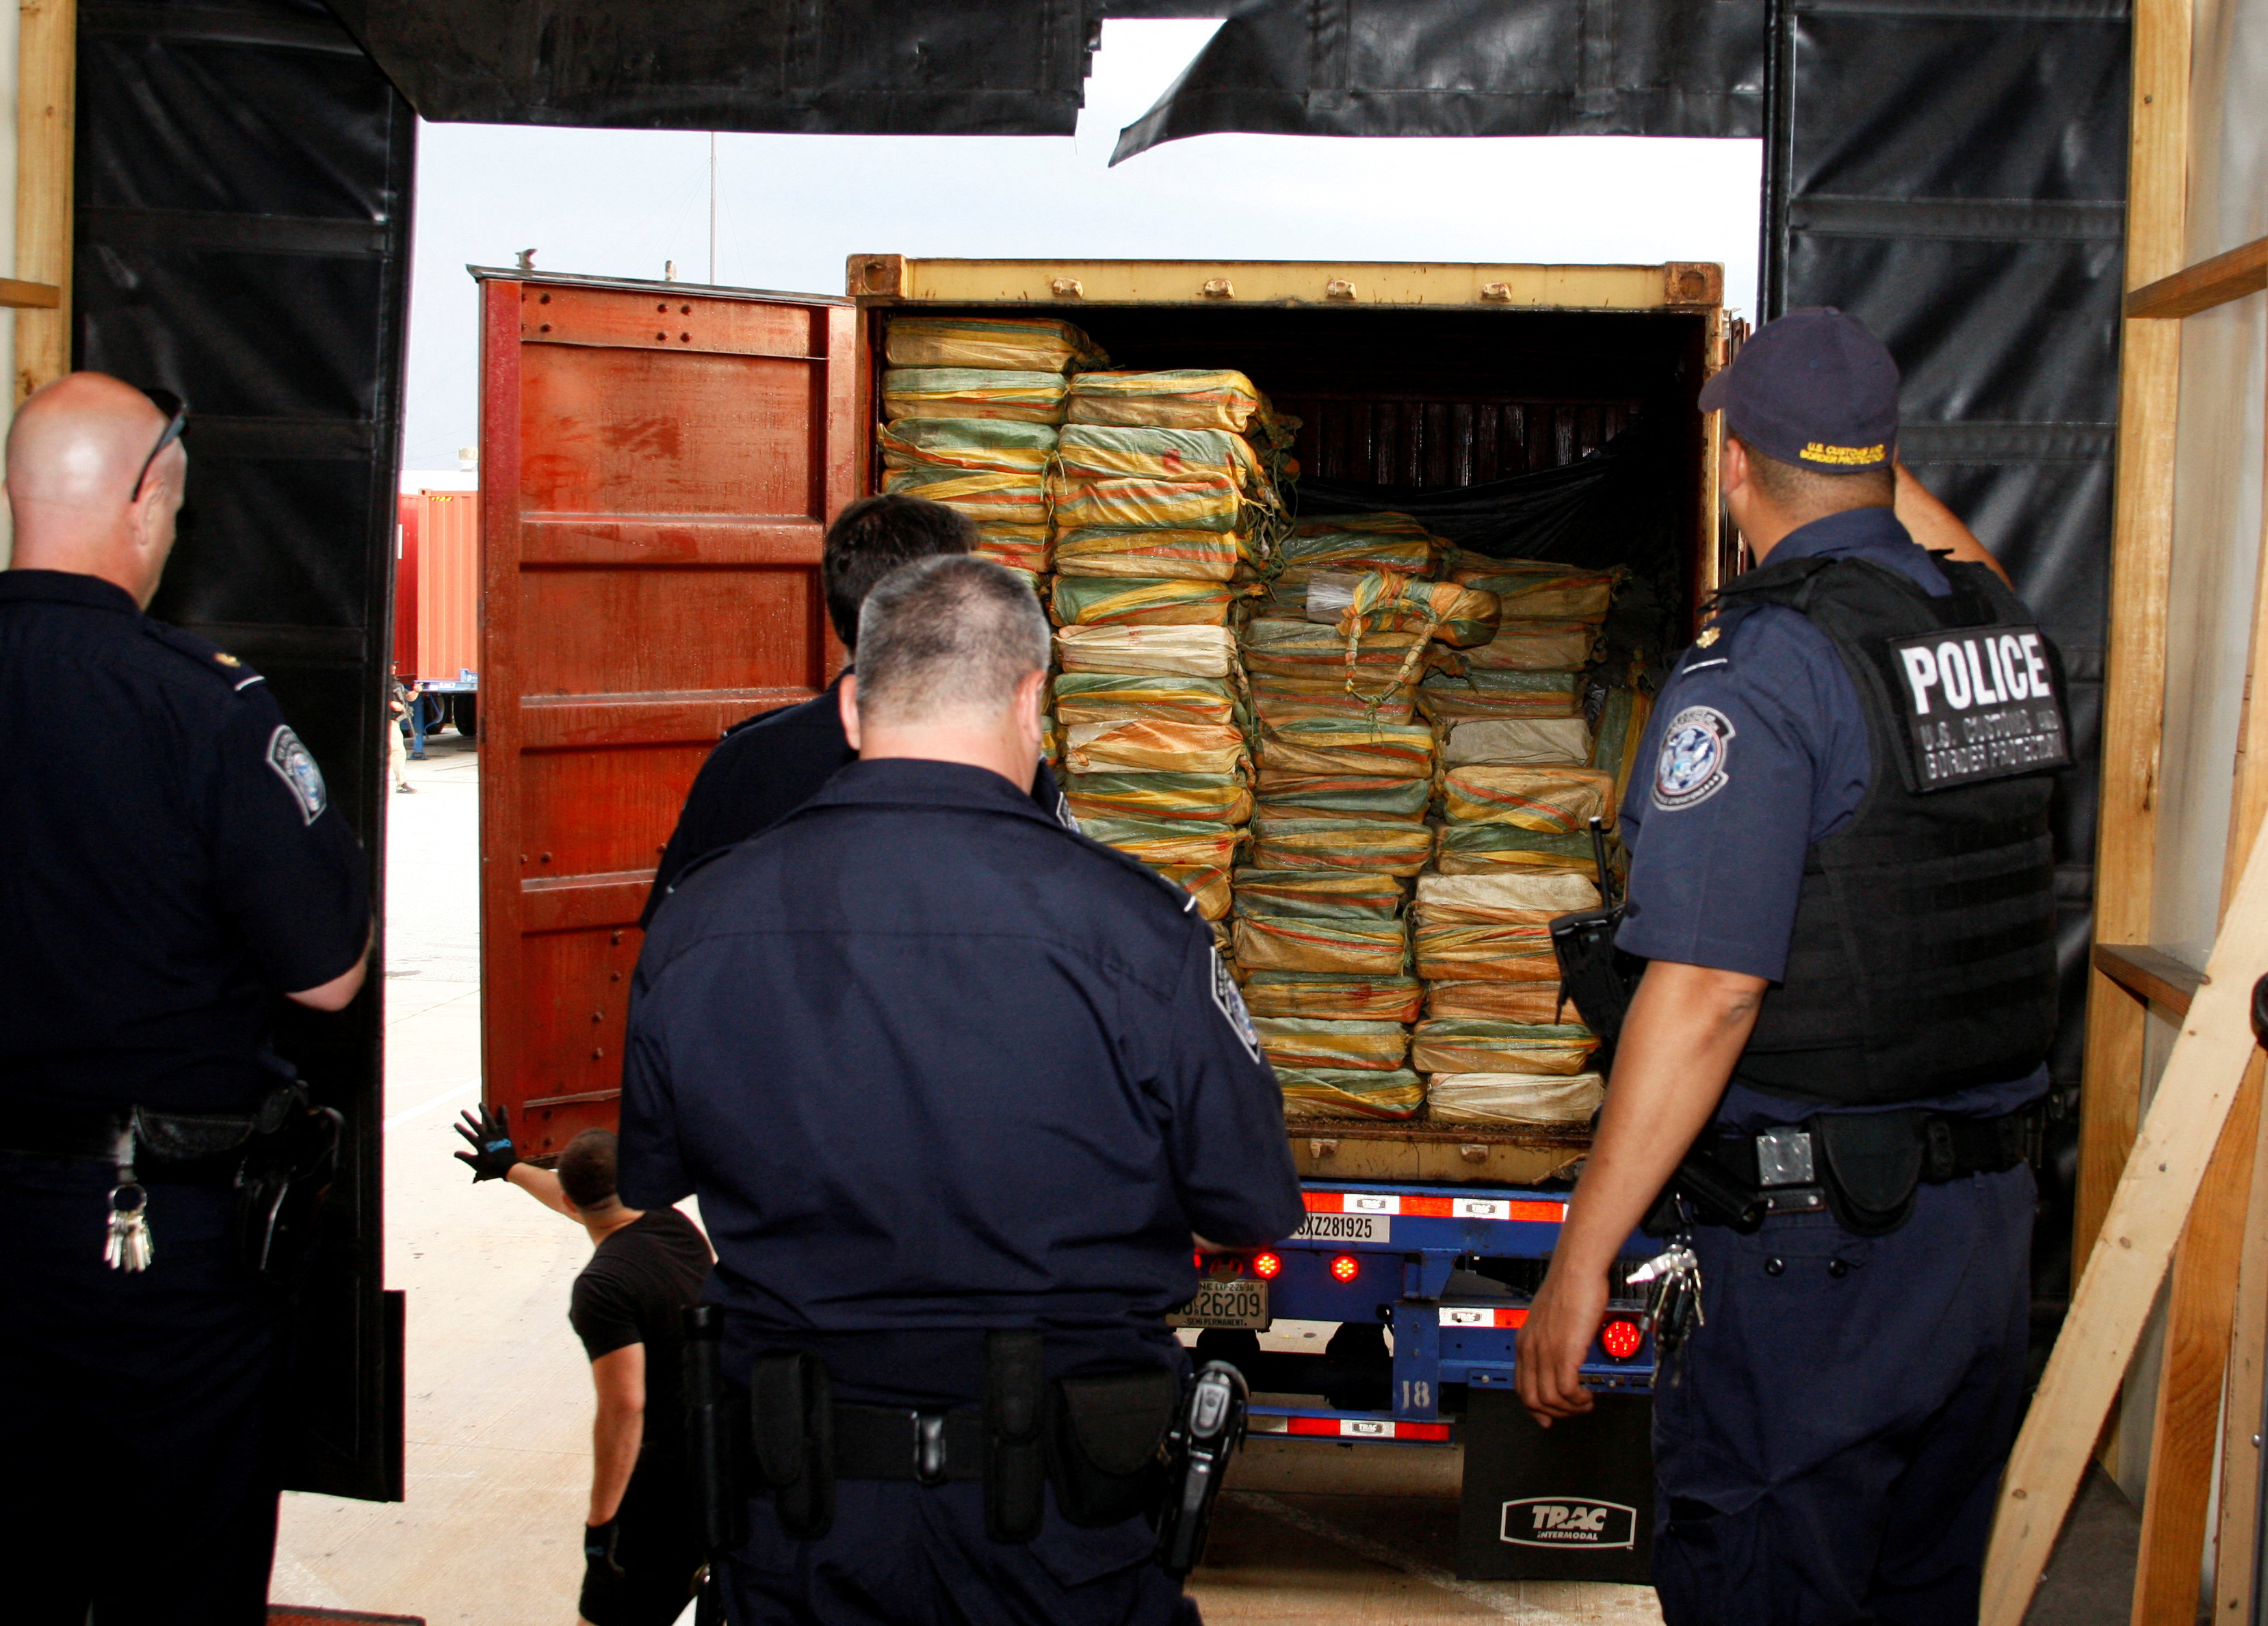 FILE PHOTO: Some of the 35,000 pounds of cocaine that U.S. Customs and Border Protection seized in Philadelphia